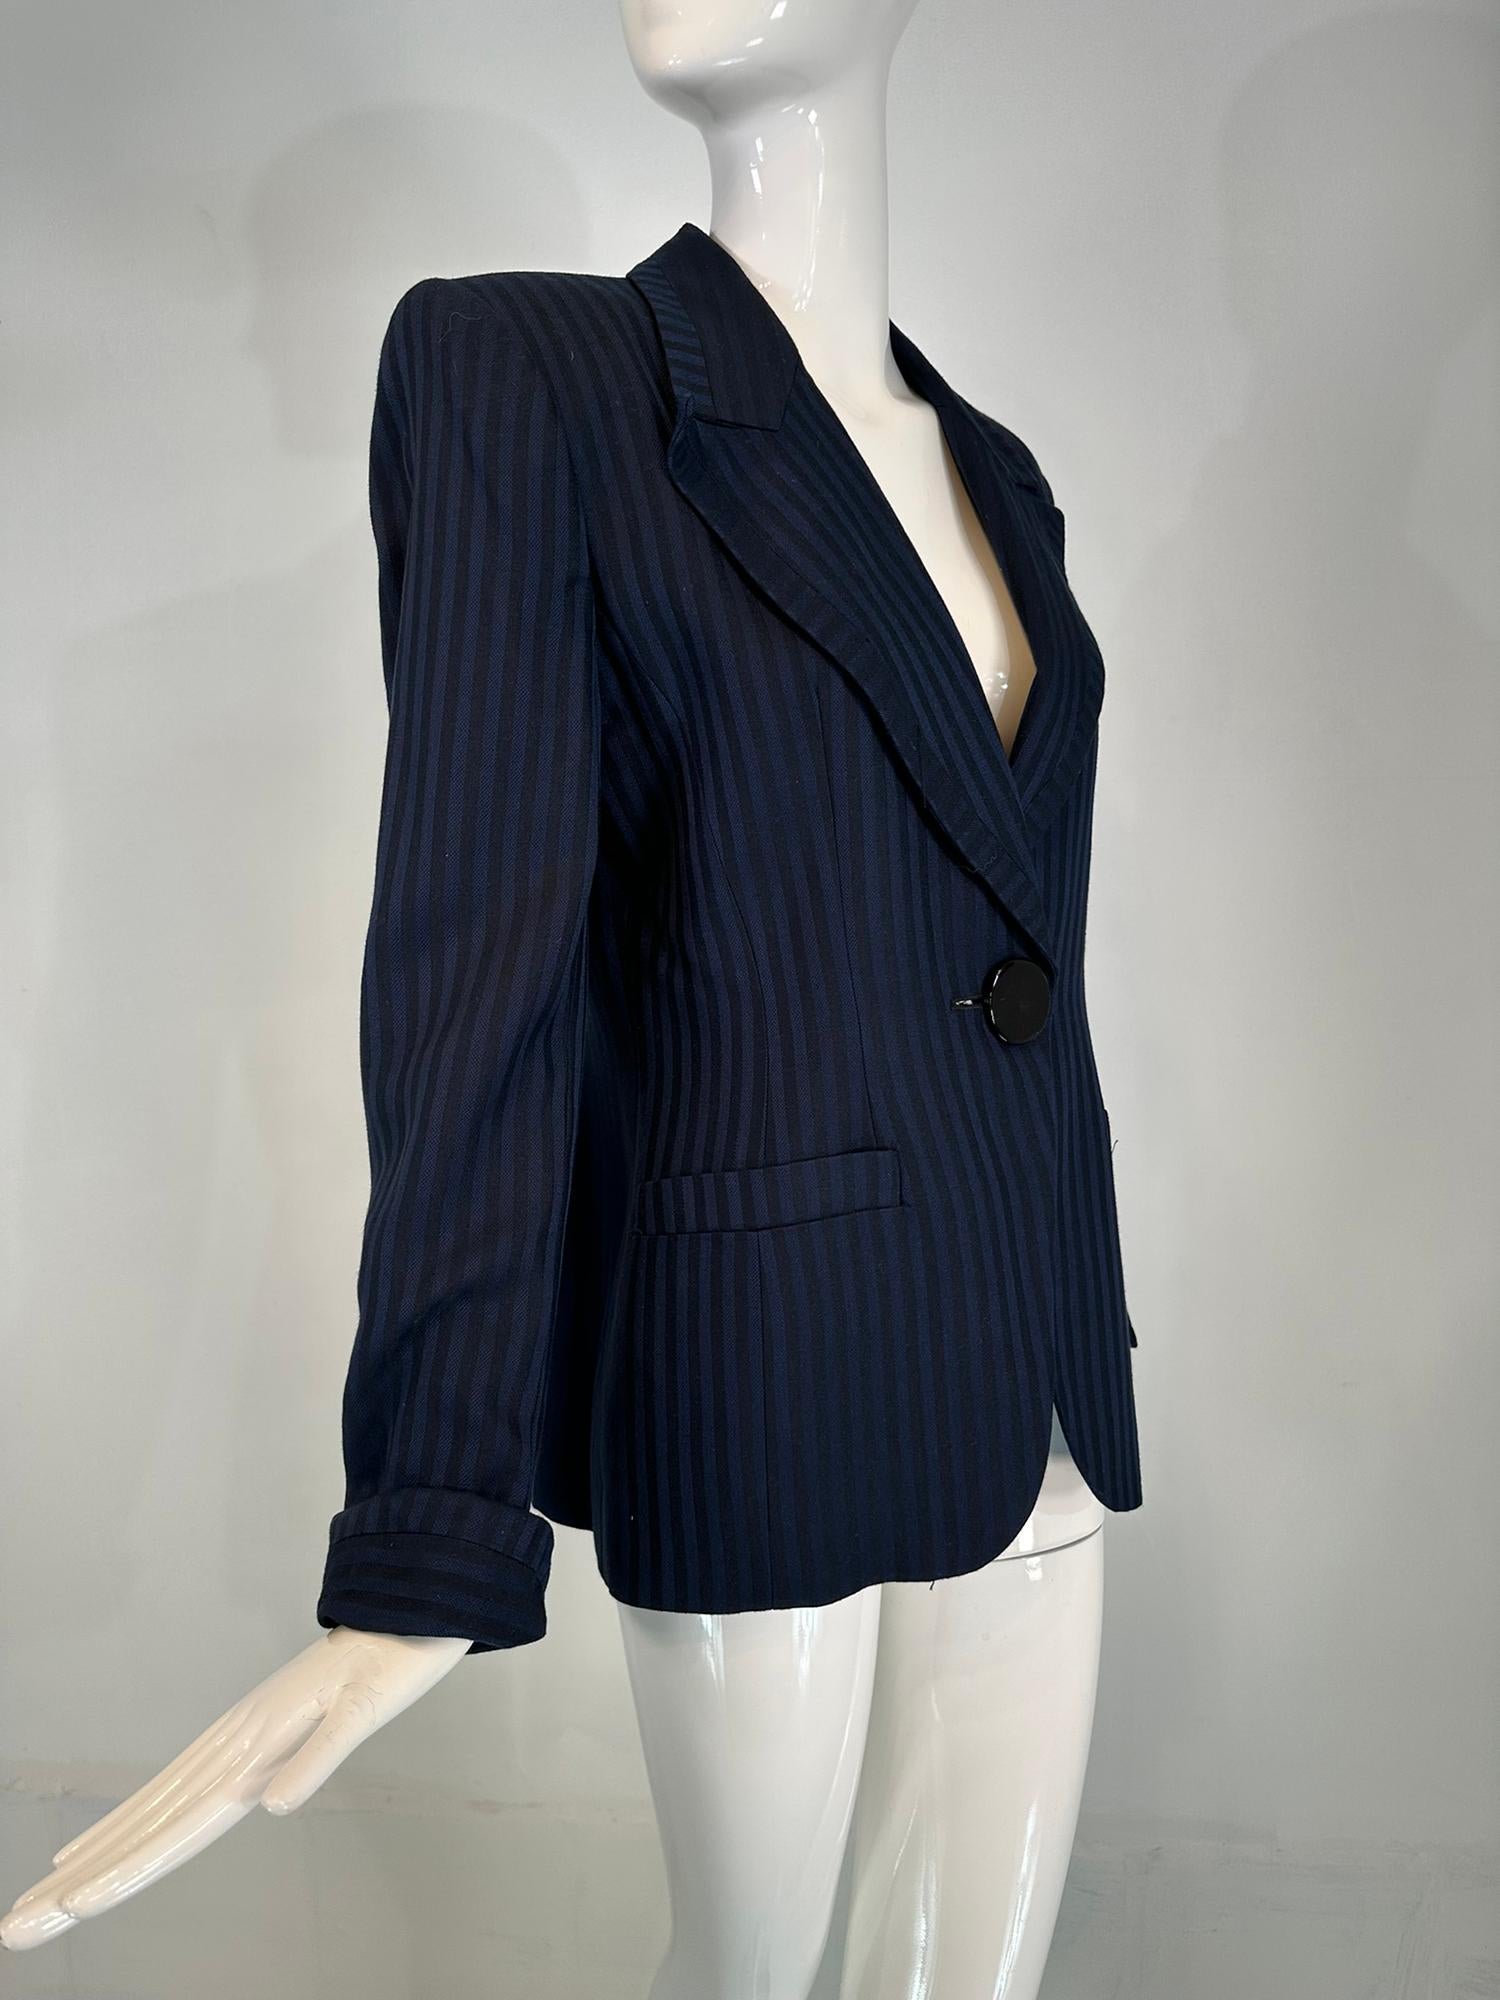 Christian Dior Navy Blue & Black Wide Stripe Wool Twill Jacket Late 90s-2000s 4 In Good Condition For Sale In West Palm Beach, FL